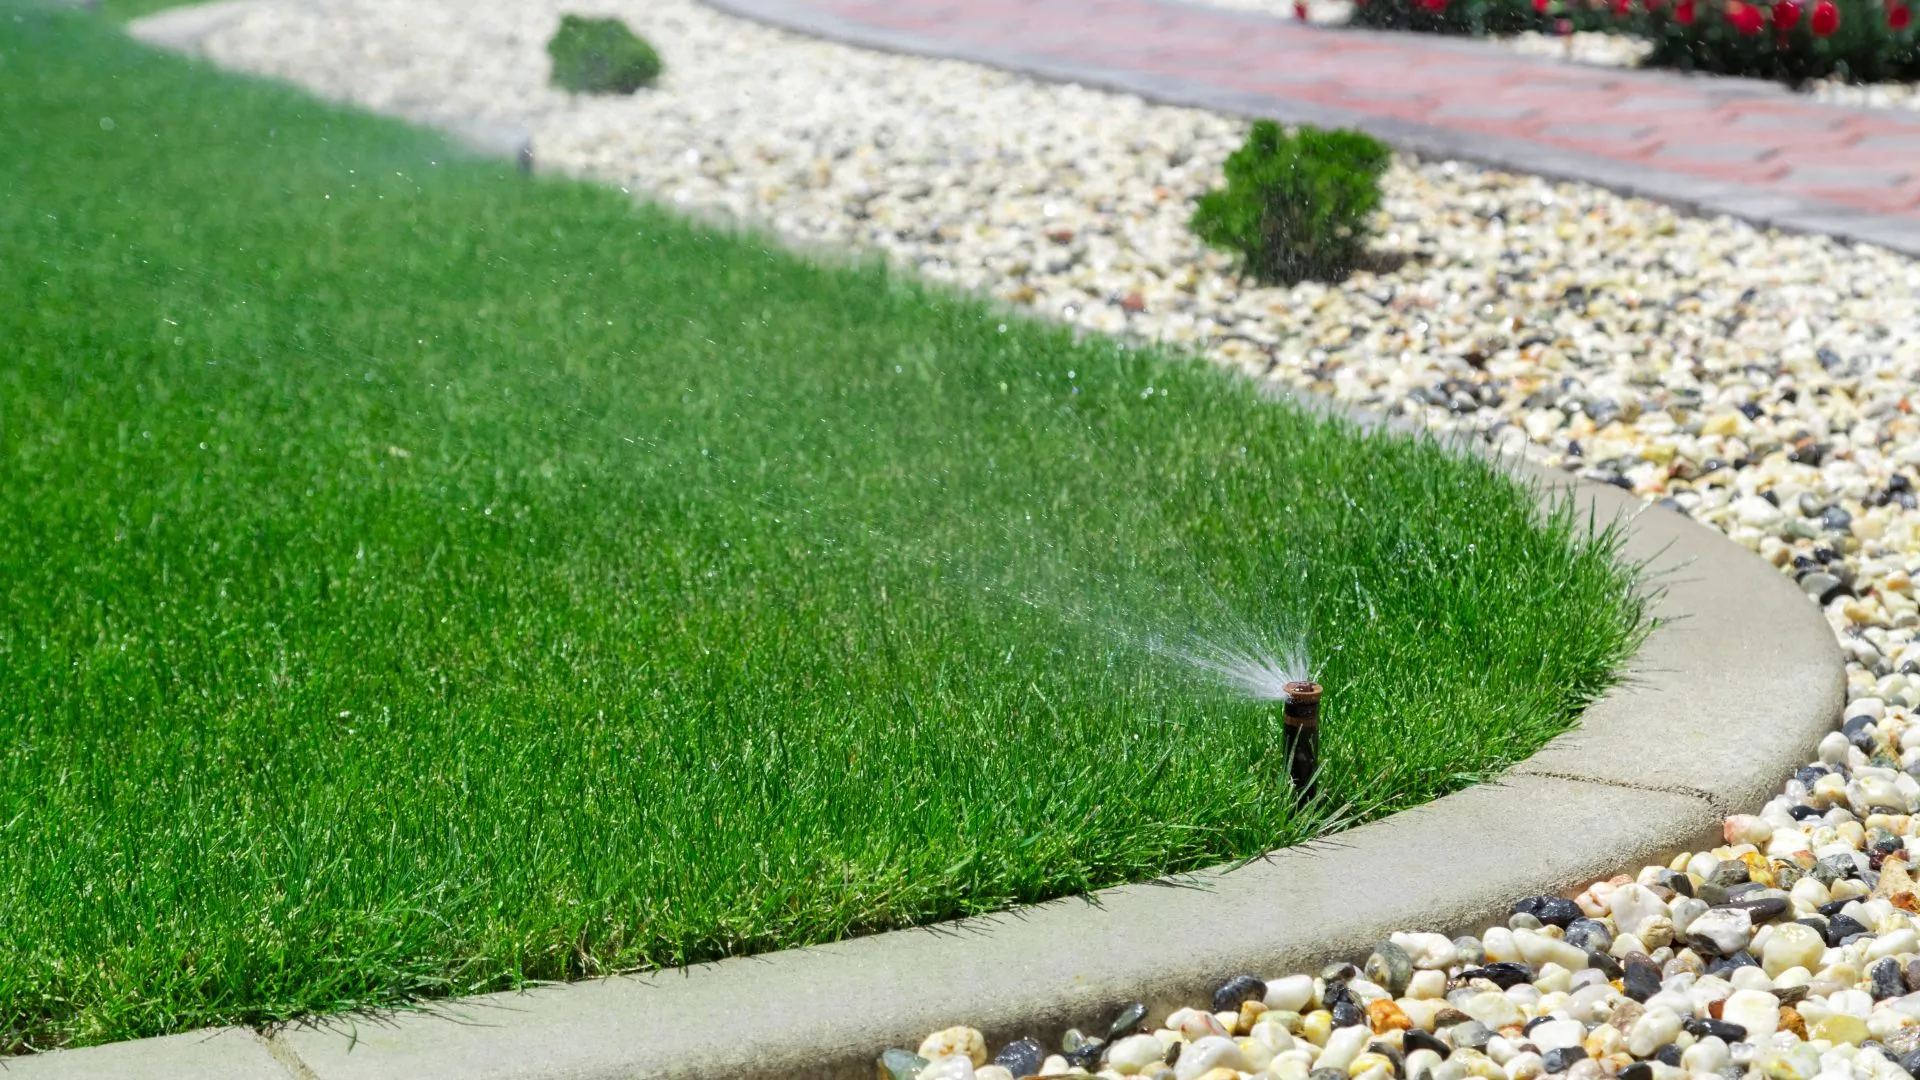 A sprinkler spraying water onto grass by a lawn curb in East Lansing, MI.